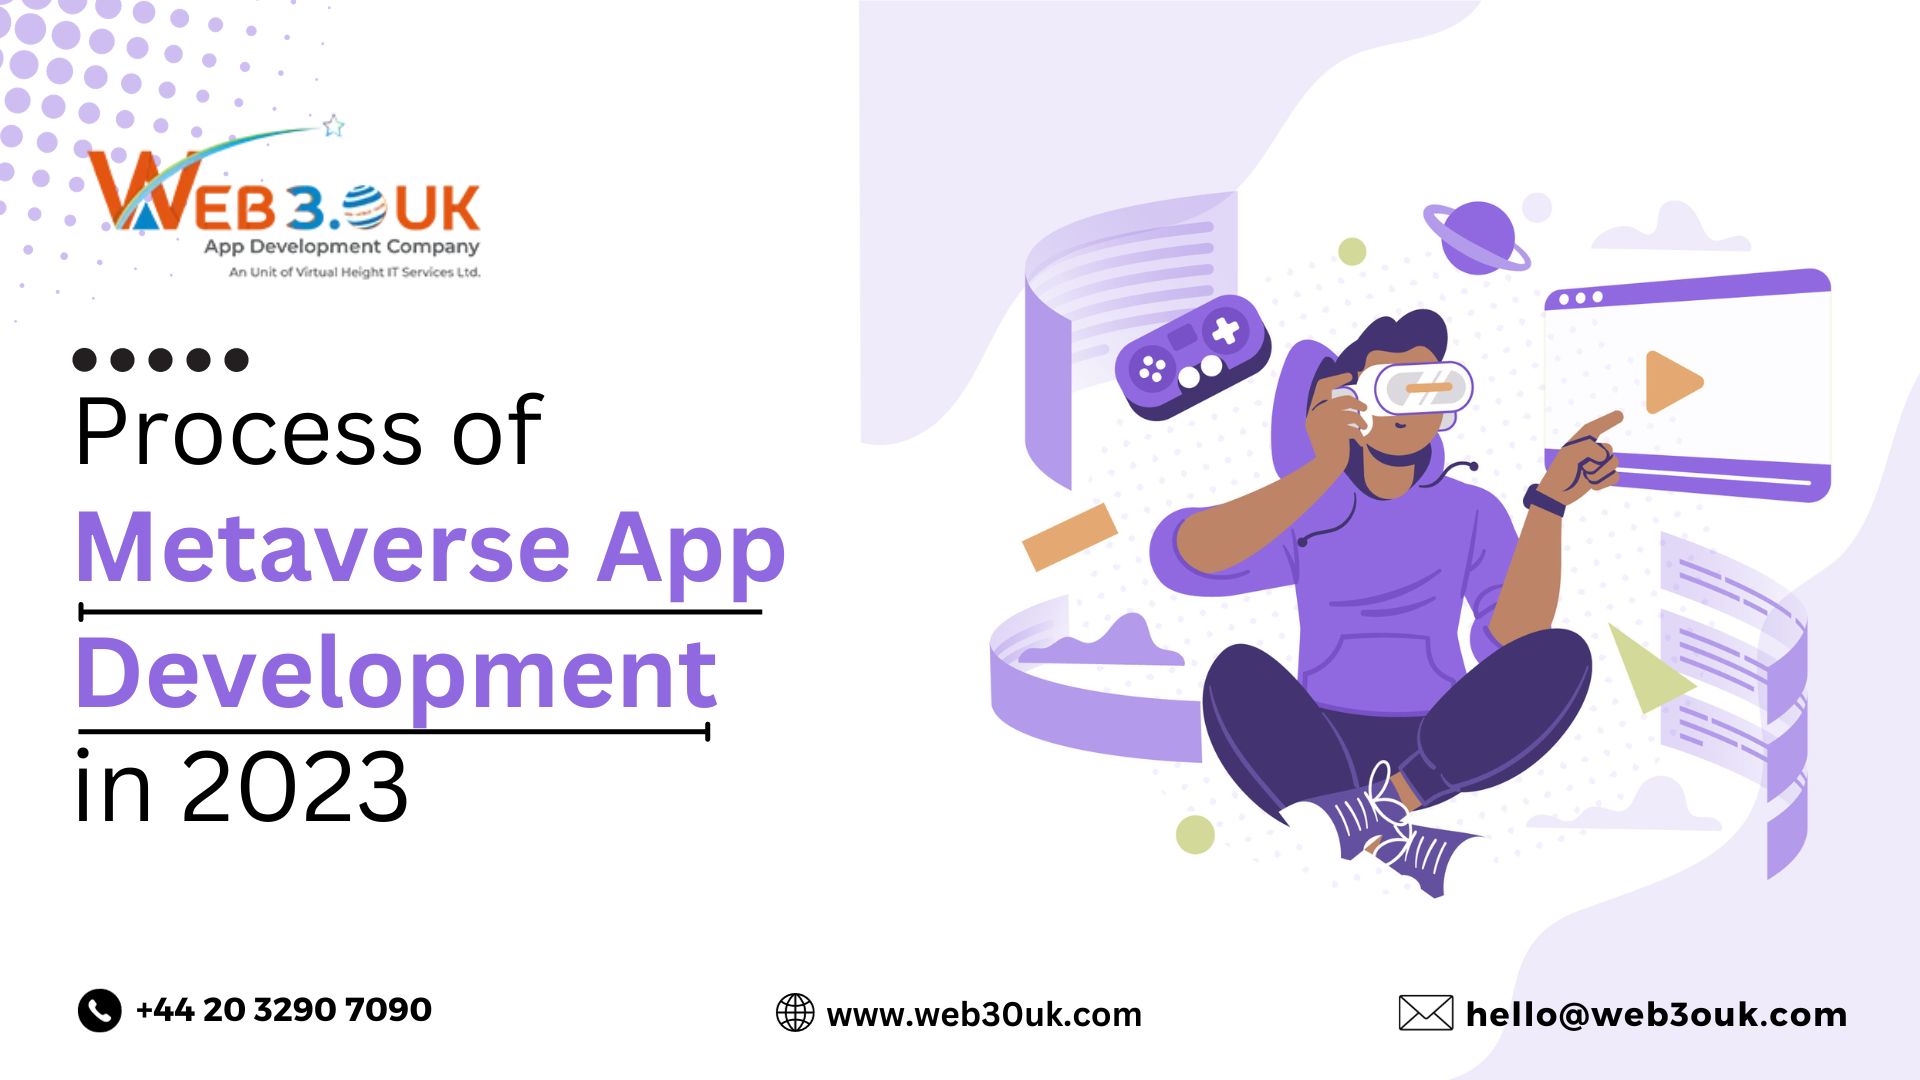 Step By Step Process of Metaverse App Development in 2023